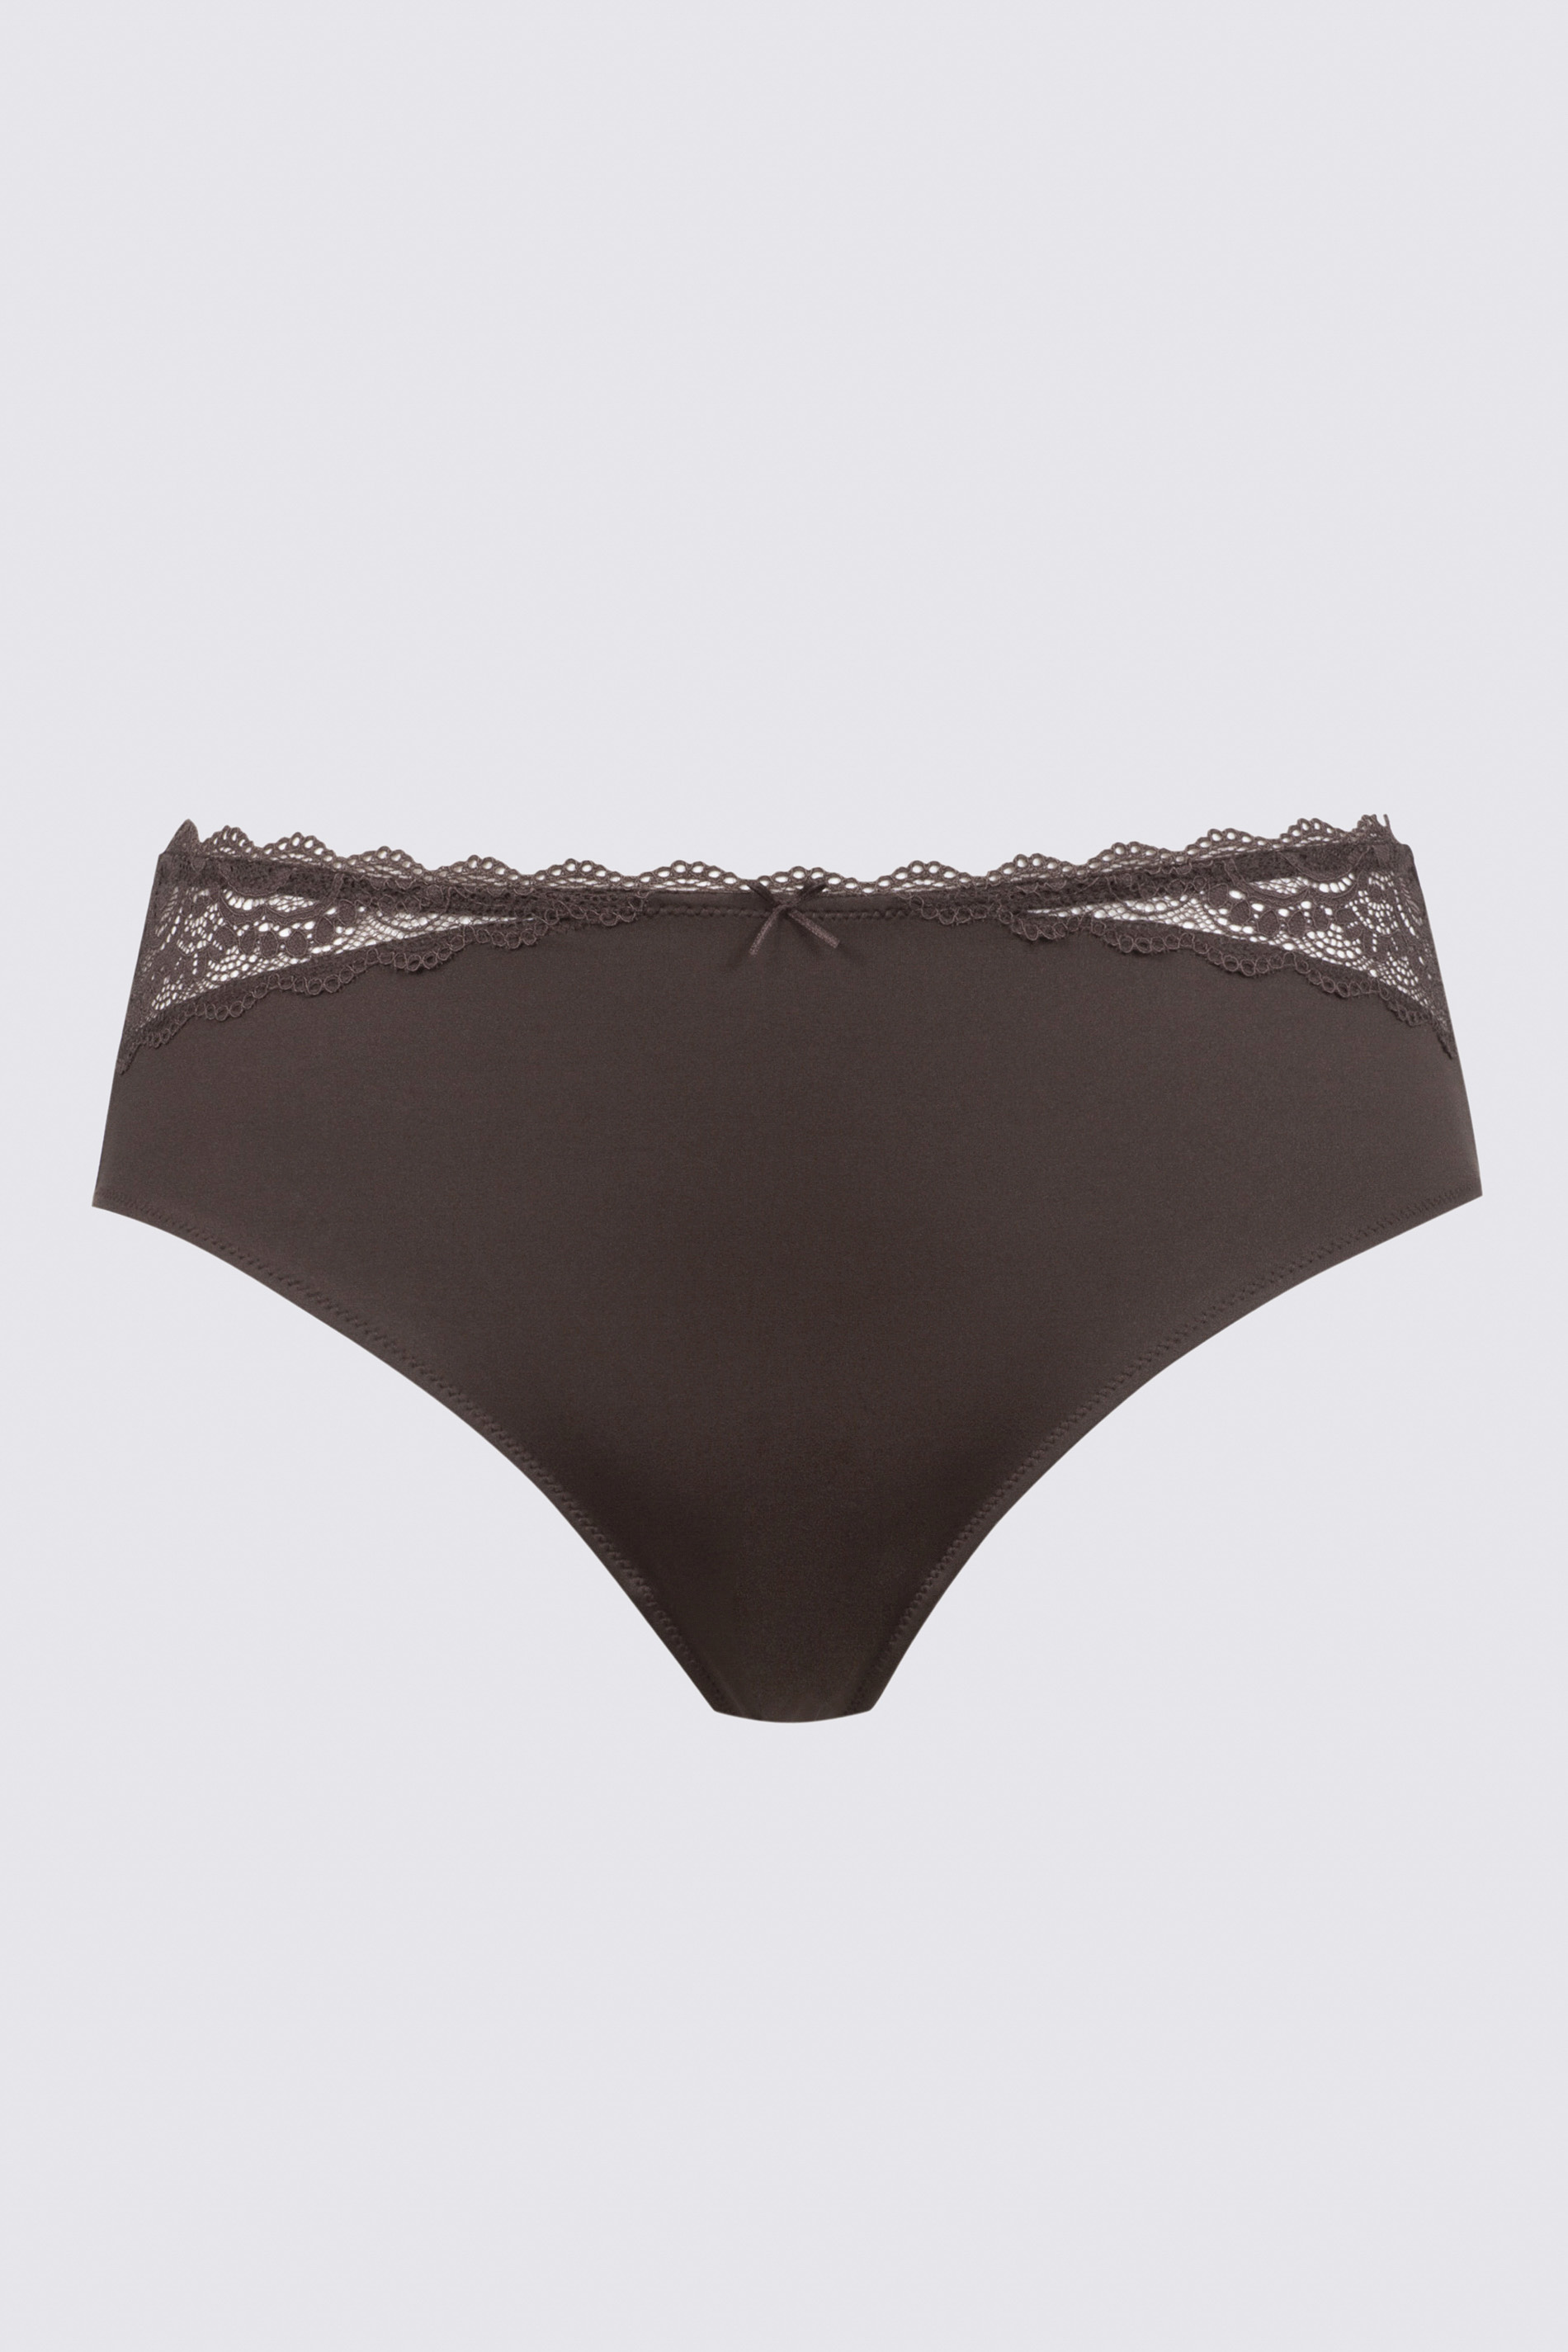 American briefs Liquorice Brown Serie Amorous Cut Out | mey®